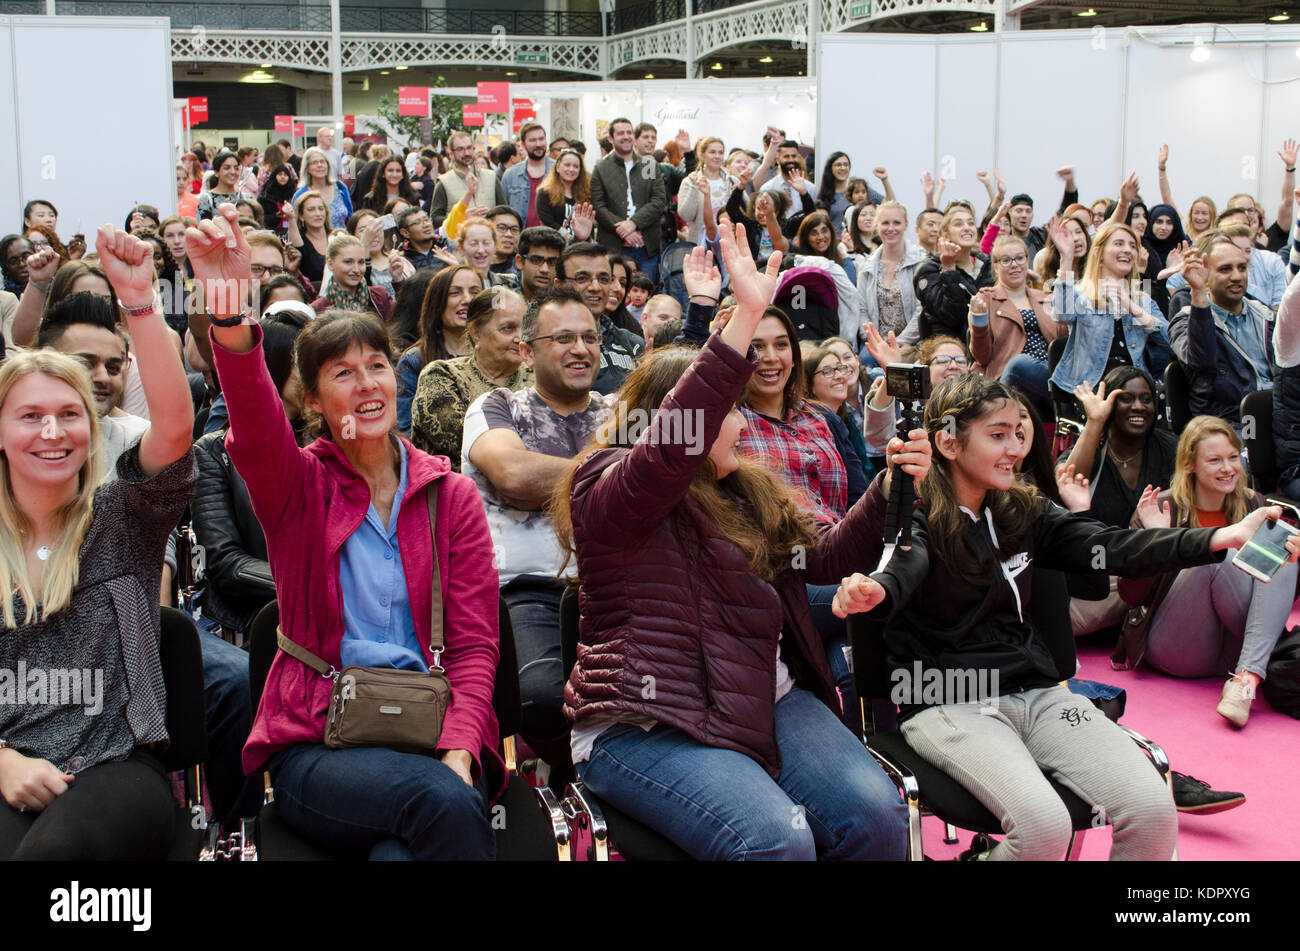 The Chocolate Show 2017 at Olympia. Audience participation at the cookery demonstrations. Chocolate fans descended en masse for The Chocolate Show, 13th-15th October 2017, at Olympia, London, UK, which ended today. Featuring a wide range of exhibitors selling everything chocolate from around the world, tastings, demonstrations by leading chefs and chocolatiers, and chocolate art and fashion displays, the show experienced high visitor numbers across all three days. 15th October 2017. Credit: Antony Nettle/Alamy Live News Stock Photo